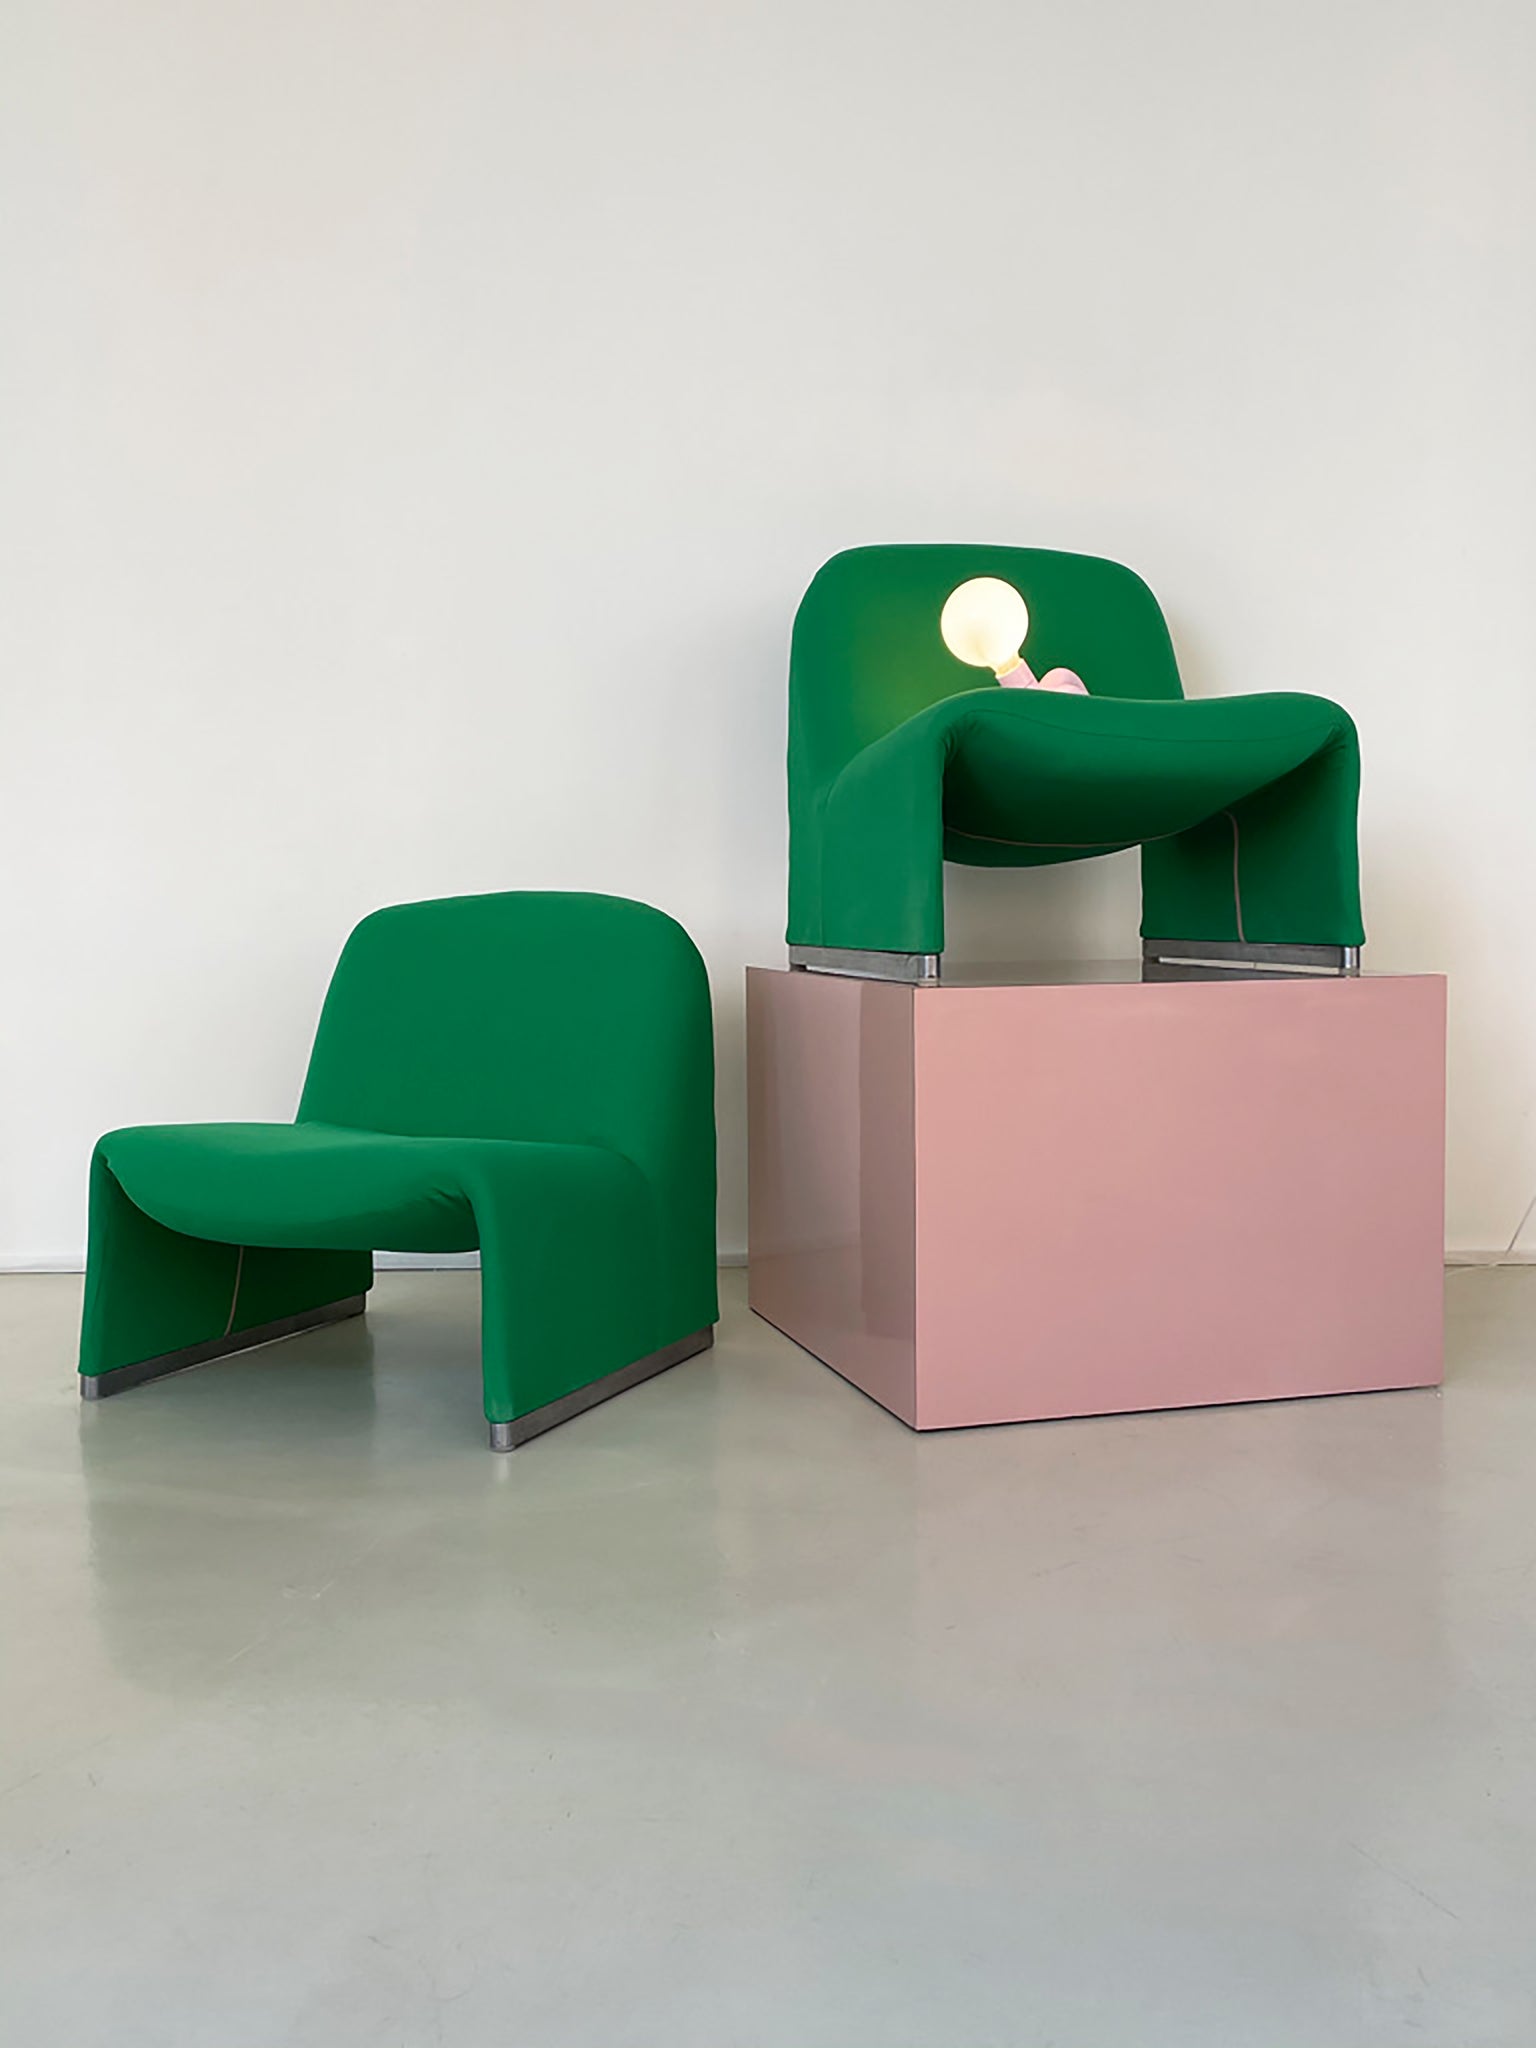 1970s Kelly Green Alky Chair by Giancarlo Piretti for Castelli